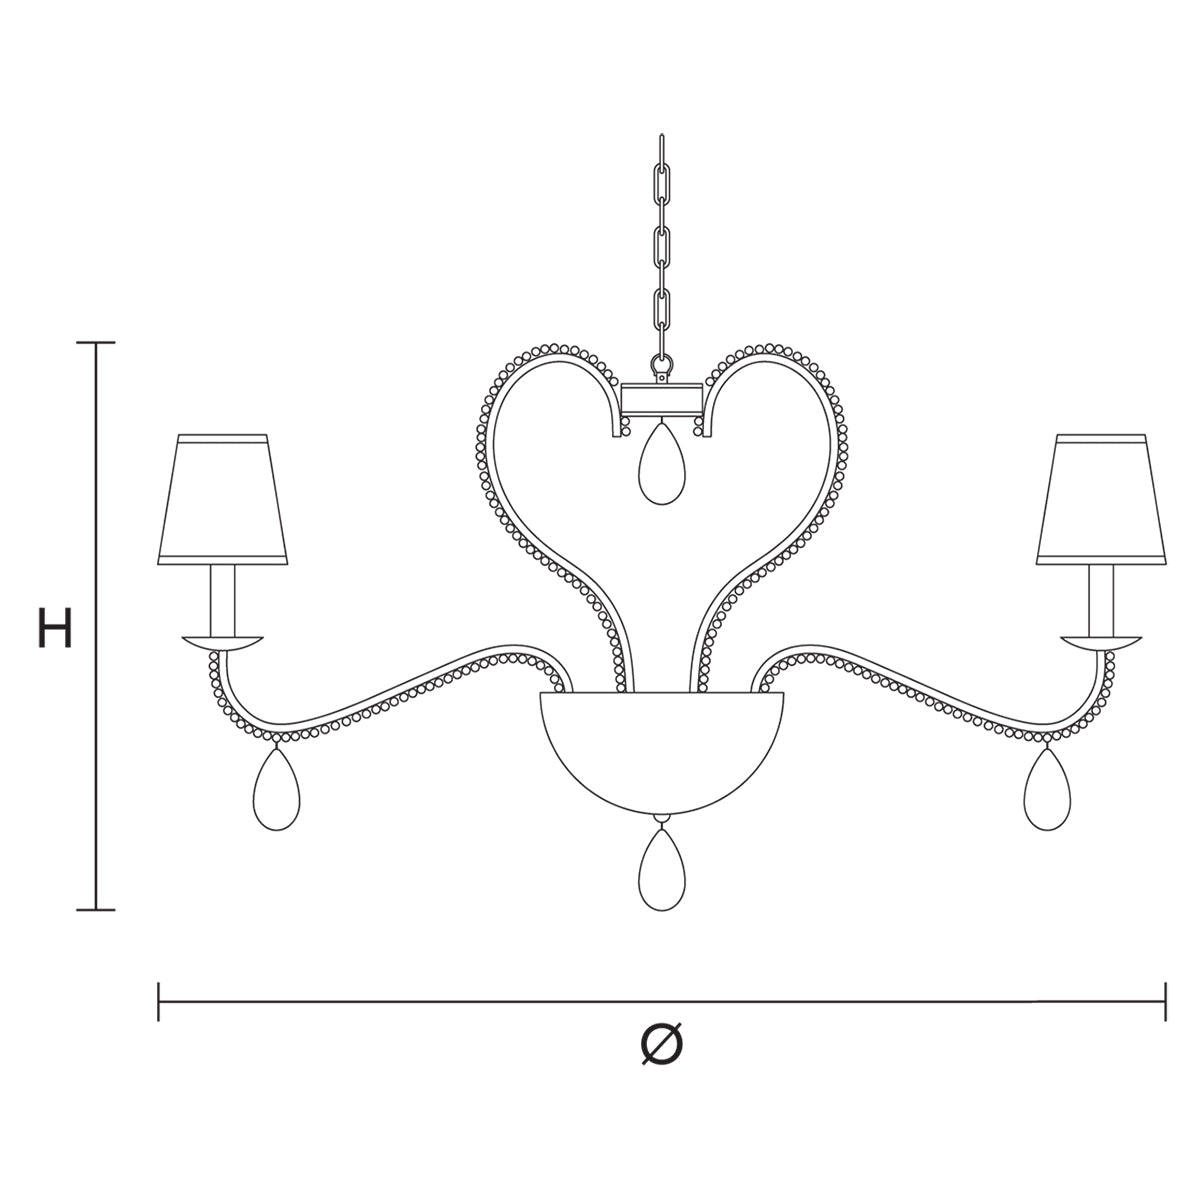 Noblesse 8 Chandelier Specifications